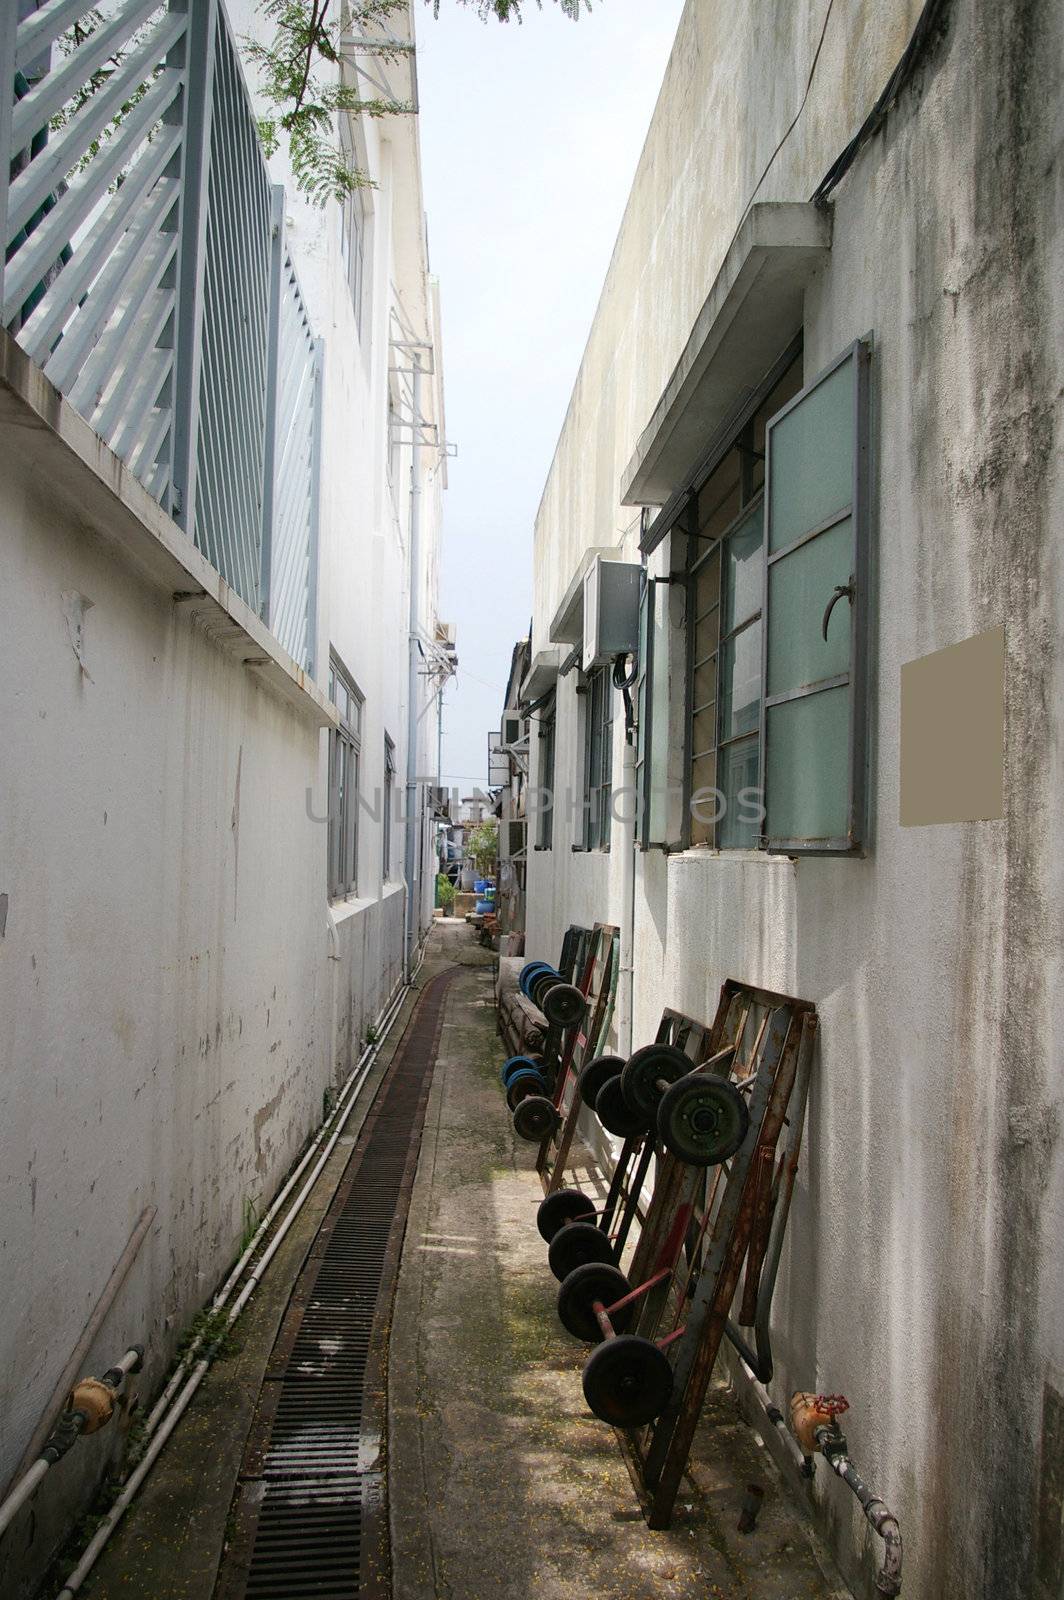 Alley in Hong Kong village by kawing921